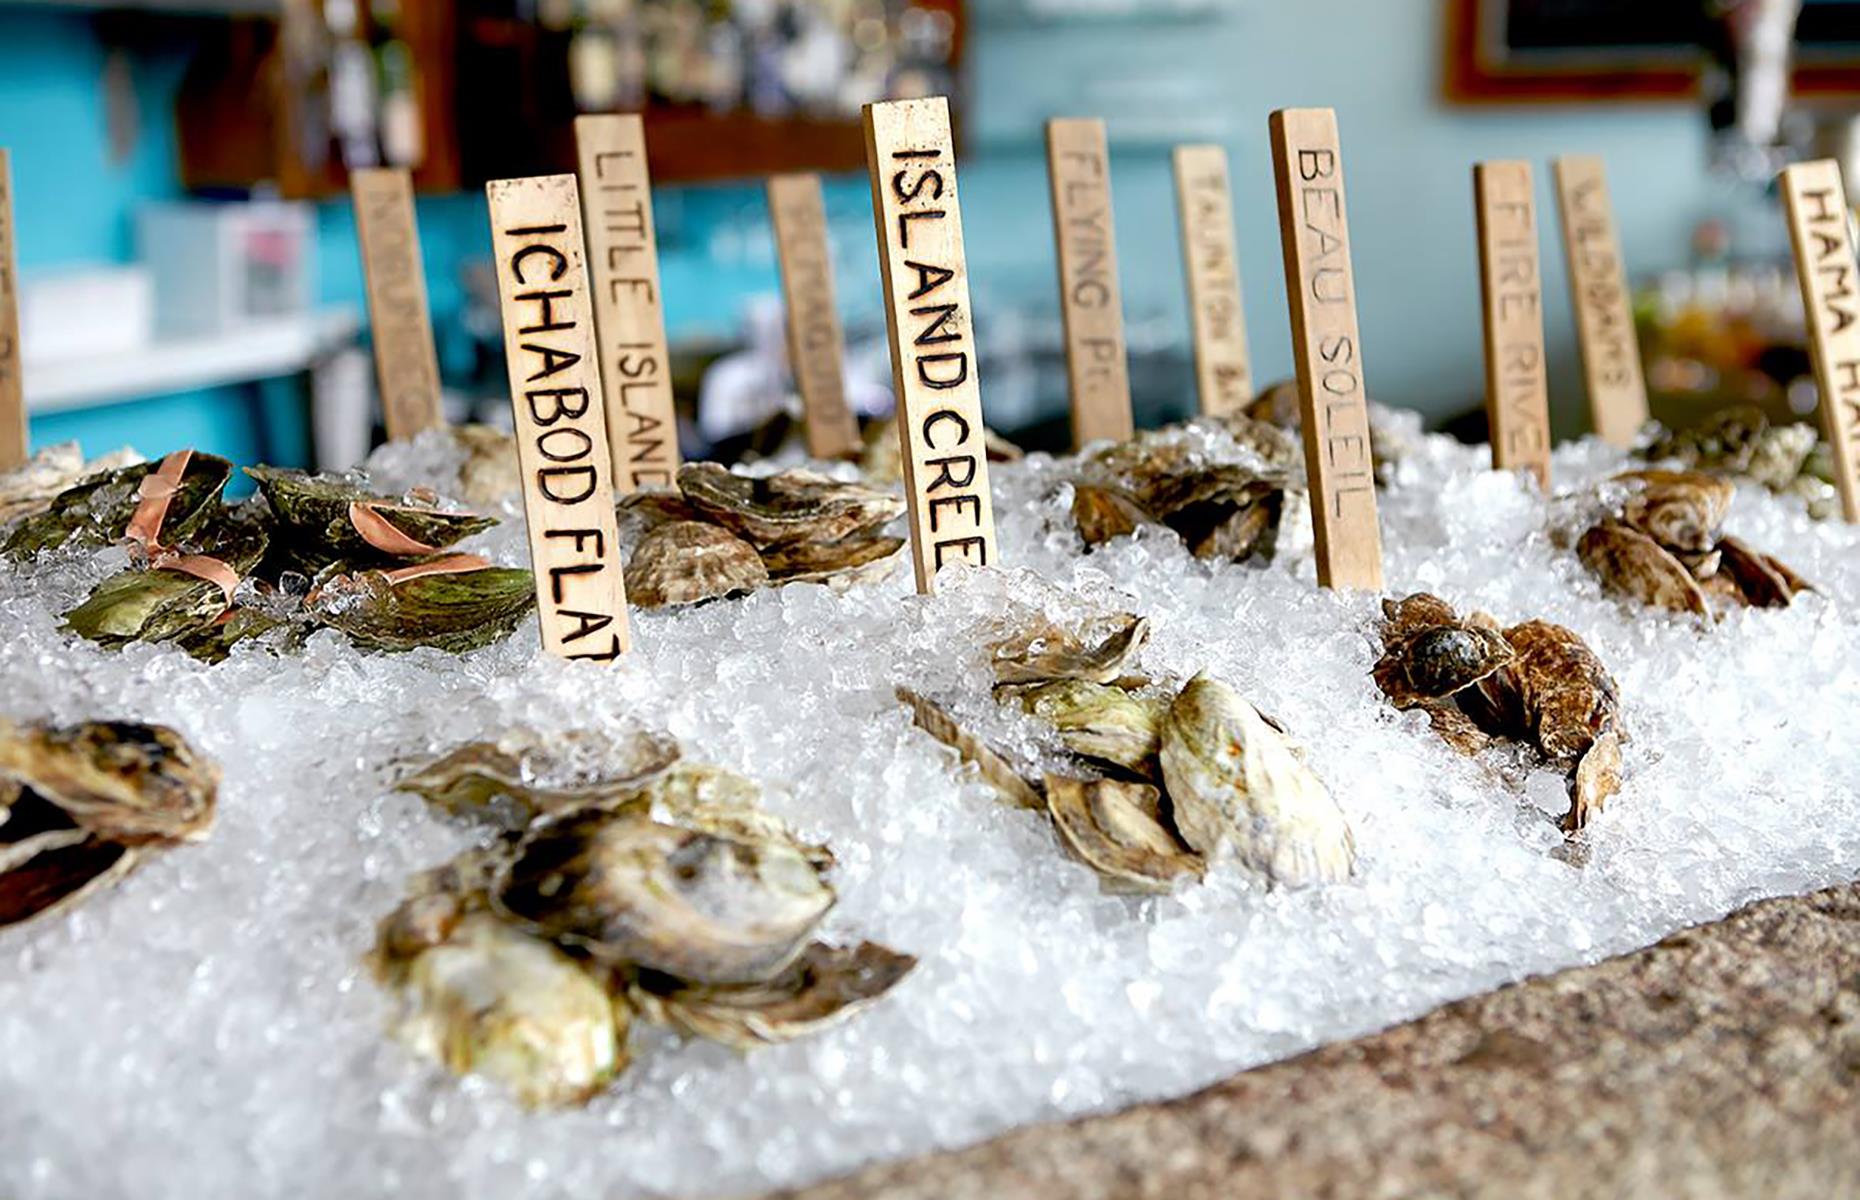 <p>It's no surprise that coastal Portland is a top spot for seafood. Restaurant menus here are filled with everything from buttery lobster rolls and oysters on the half shell to grilled catch of the day. Customers flock to the raw bar at the dinky Eventide Oyster Co. (pictured), and to Fore Street Restaurant, which is acclaimed for its Maine mussels and hanger steak. Beyond that, try Miyake for imaginative sushi and Japanese small plates, or head to the Italian-inspired Leeward for ‘nduja sausage ravioli, and seared Maine scallops with hazelnut butter.</p>